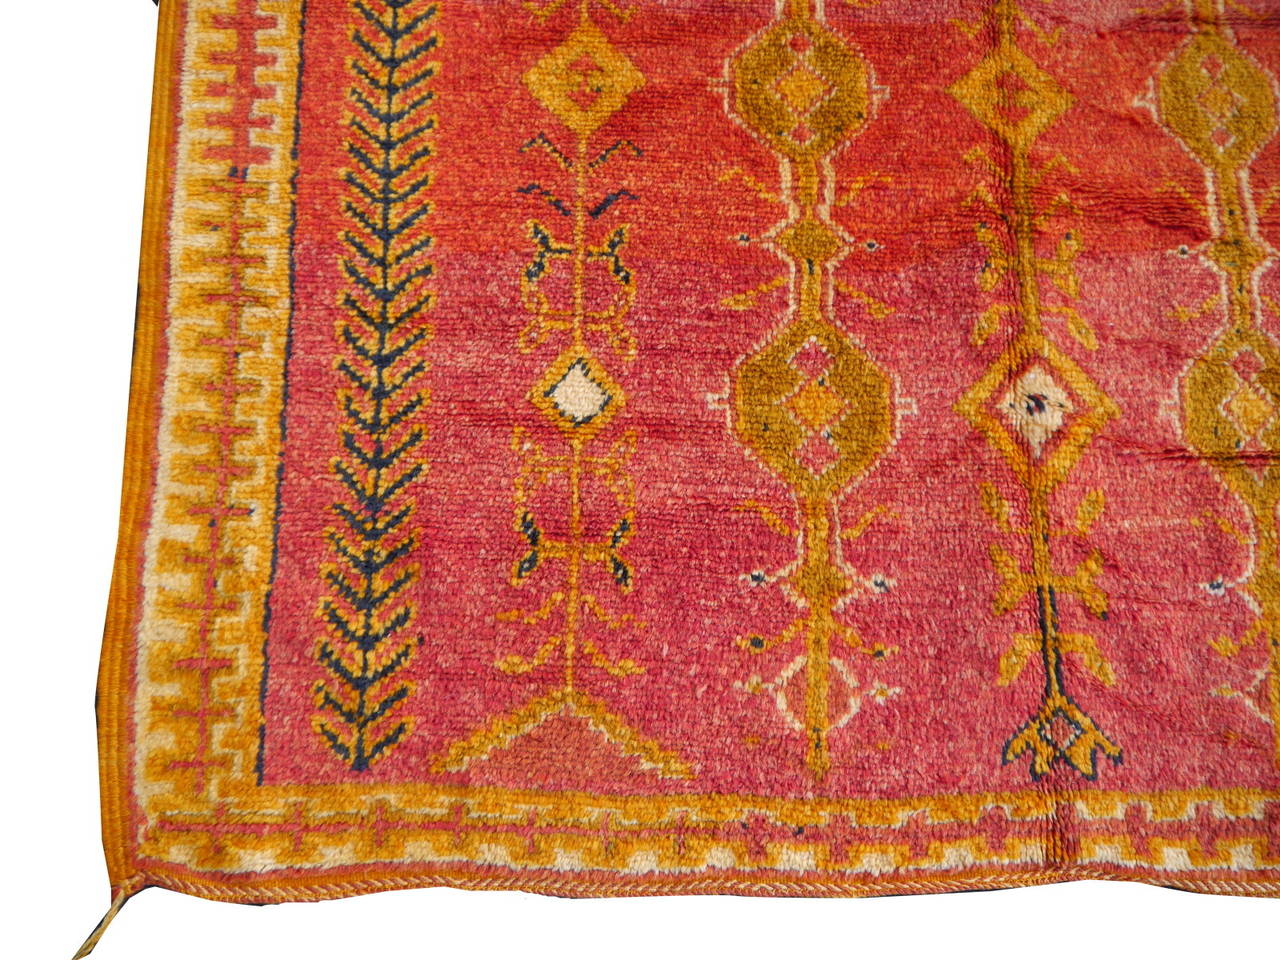 Great vintage Berber carpet, hand-knotted by the Berber women of Morocco. These impressive tribal carpets are all handmade. The wool is handspun and dyed with natural dyes. Typical is the color change called abrash which results from different